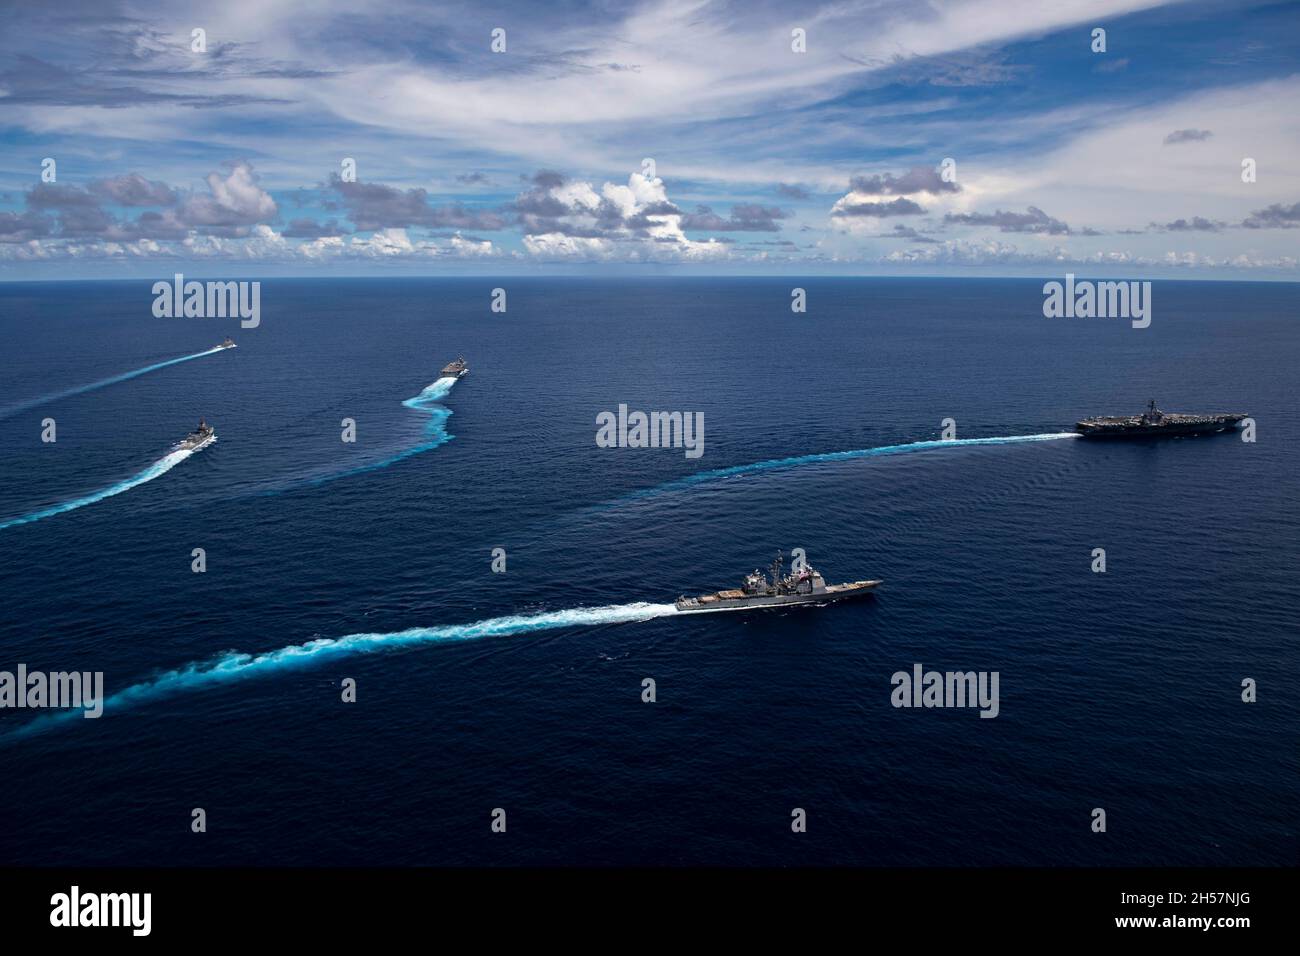 South China Sea, United States. 30 October, 2021. The U.S. Navy Nimitz-class aircraft carrier USS Carl Vinson and the Japan Maritime Self-Defense Force Izumo-class helicopter destroyer JS Kaga, lead a formation during joint operations October 30, 2021 in the South China Sea. Sailing are the USS Shiloh, USS Lake Champlain, USS Carl Vinson, USS Milius, JS Murasame and JS Kaga. Credit: MC2 Haydn Smith/U.S. Navy/Alamy Live News Stock Photo